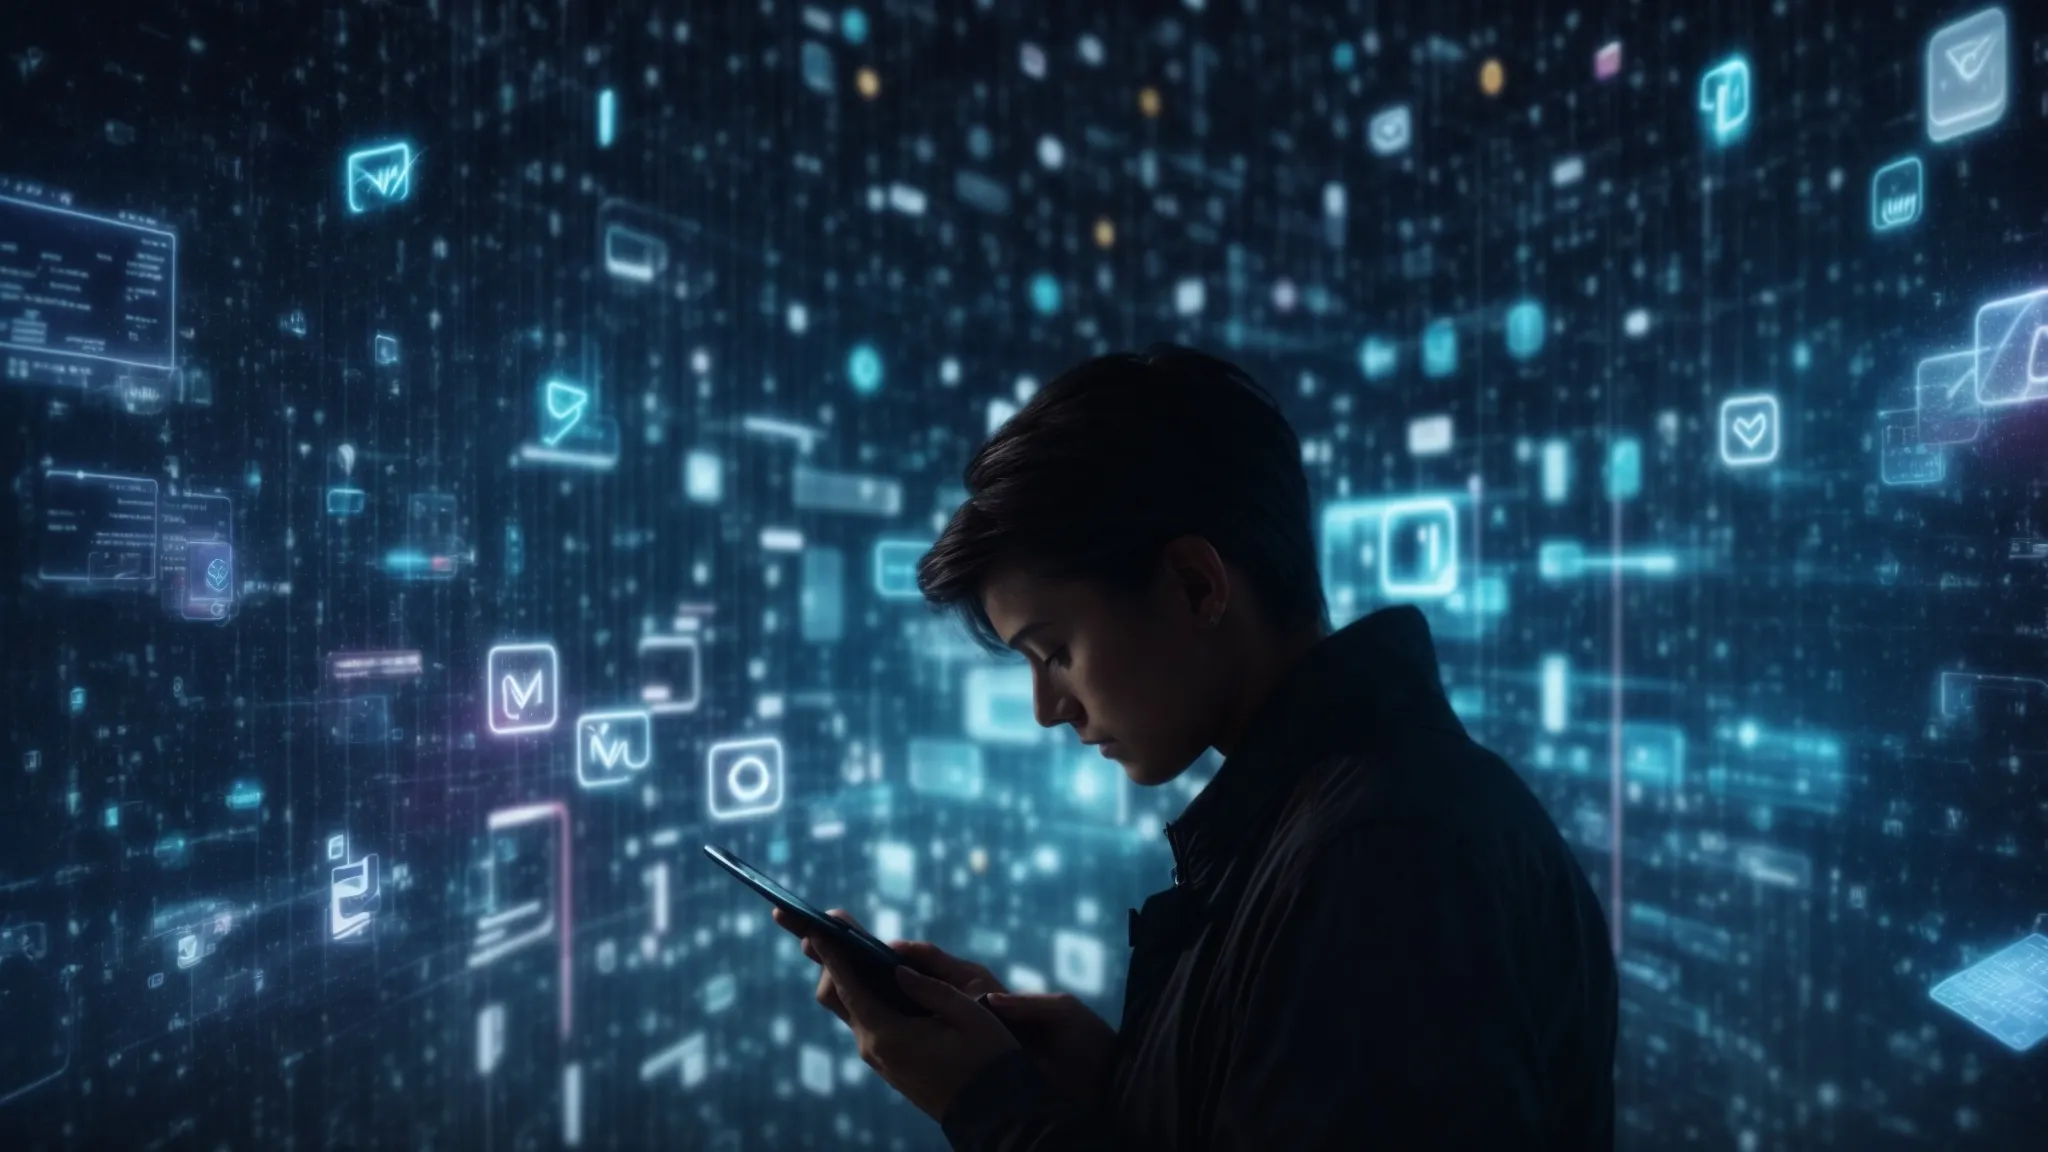 a person contemplating a glowing email icon amidst a sea of digital symbols on a dark, futuristic interface.